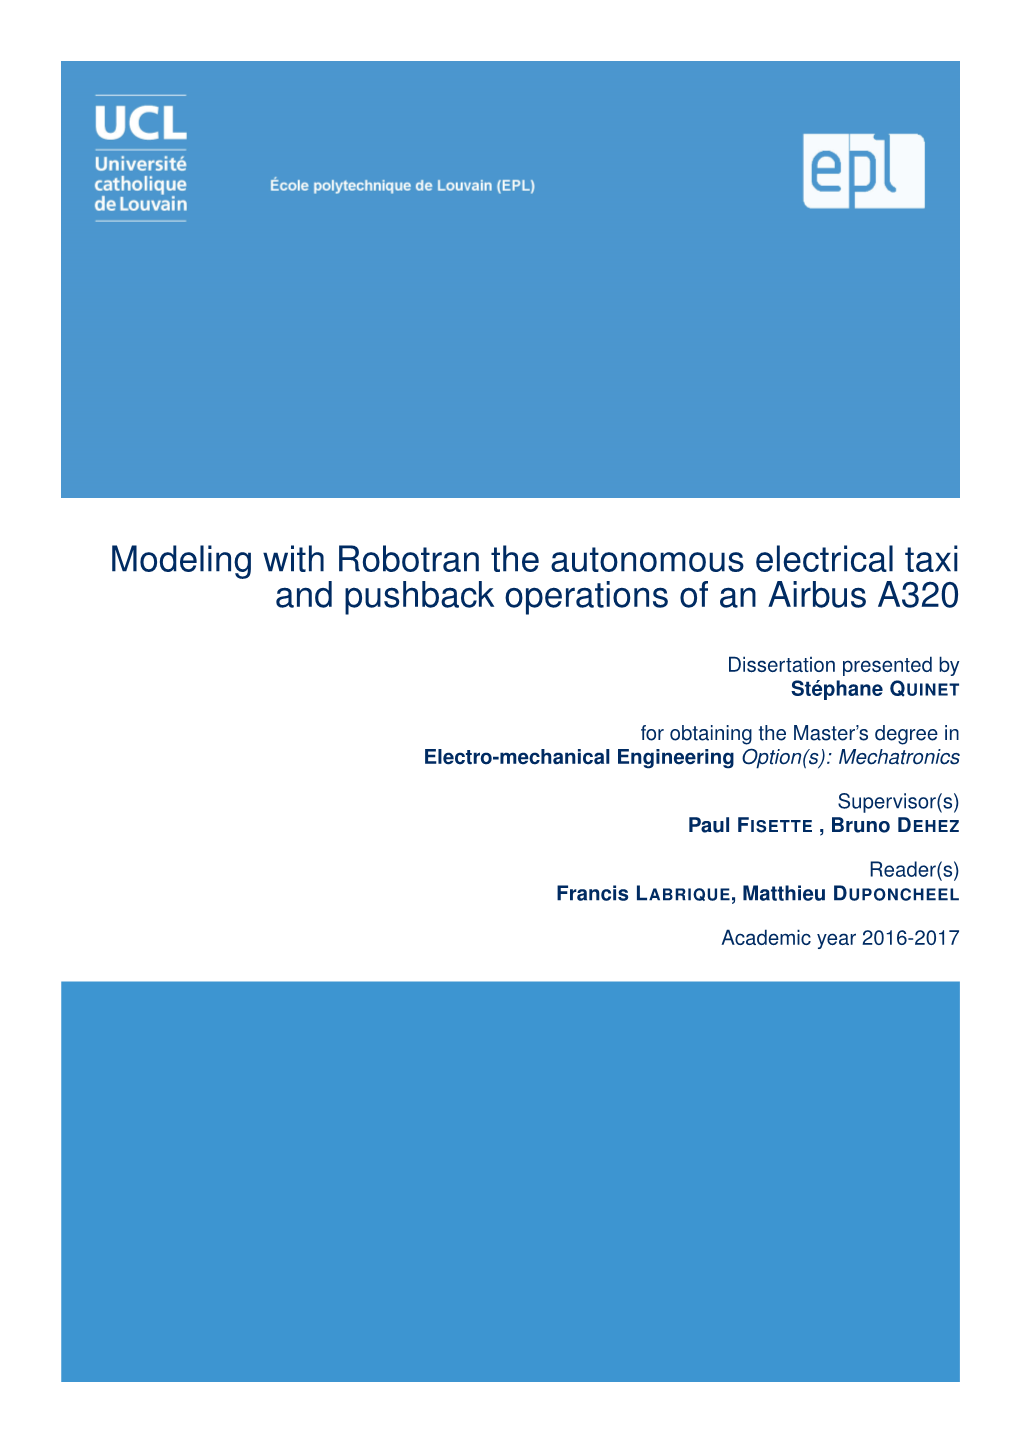 Modeling with Robotran the Autonomous Electrical Taxi and Pushback Operations of an Airbus A320